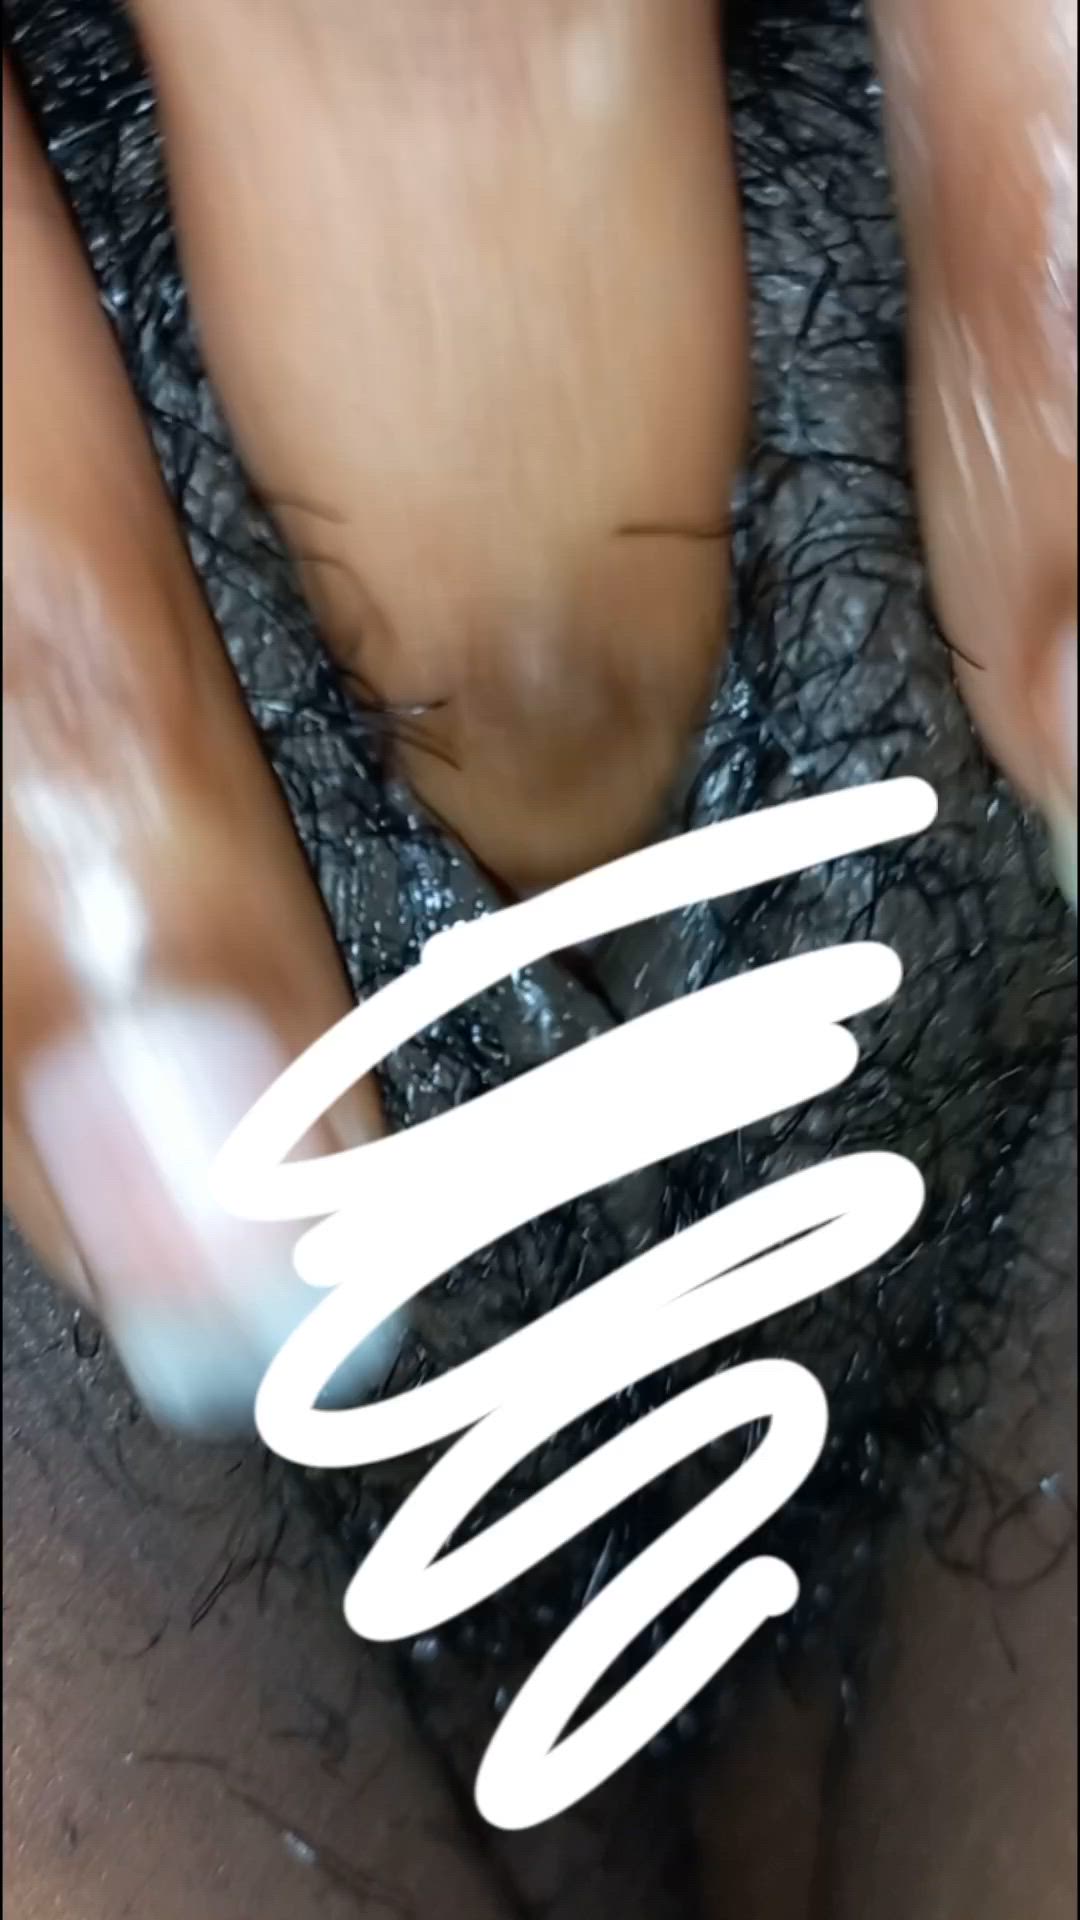 Pussy porn video with onlyfans model caramelcurves <strong>@caramelcurvesfree</strong>